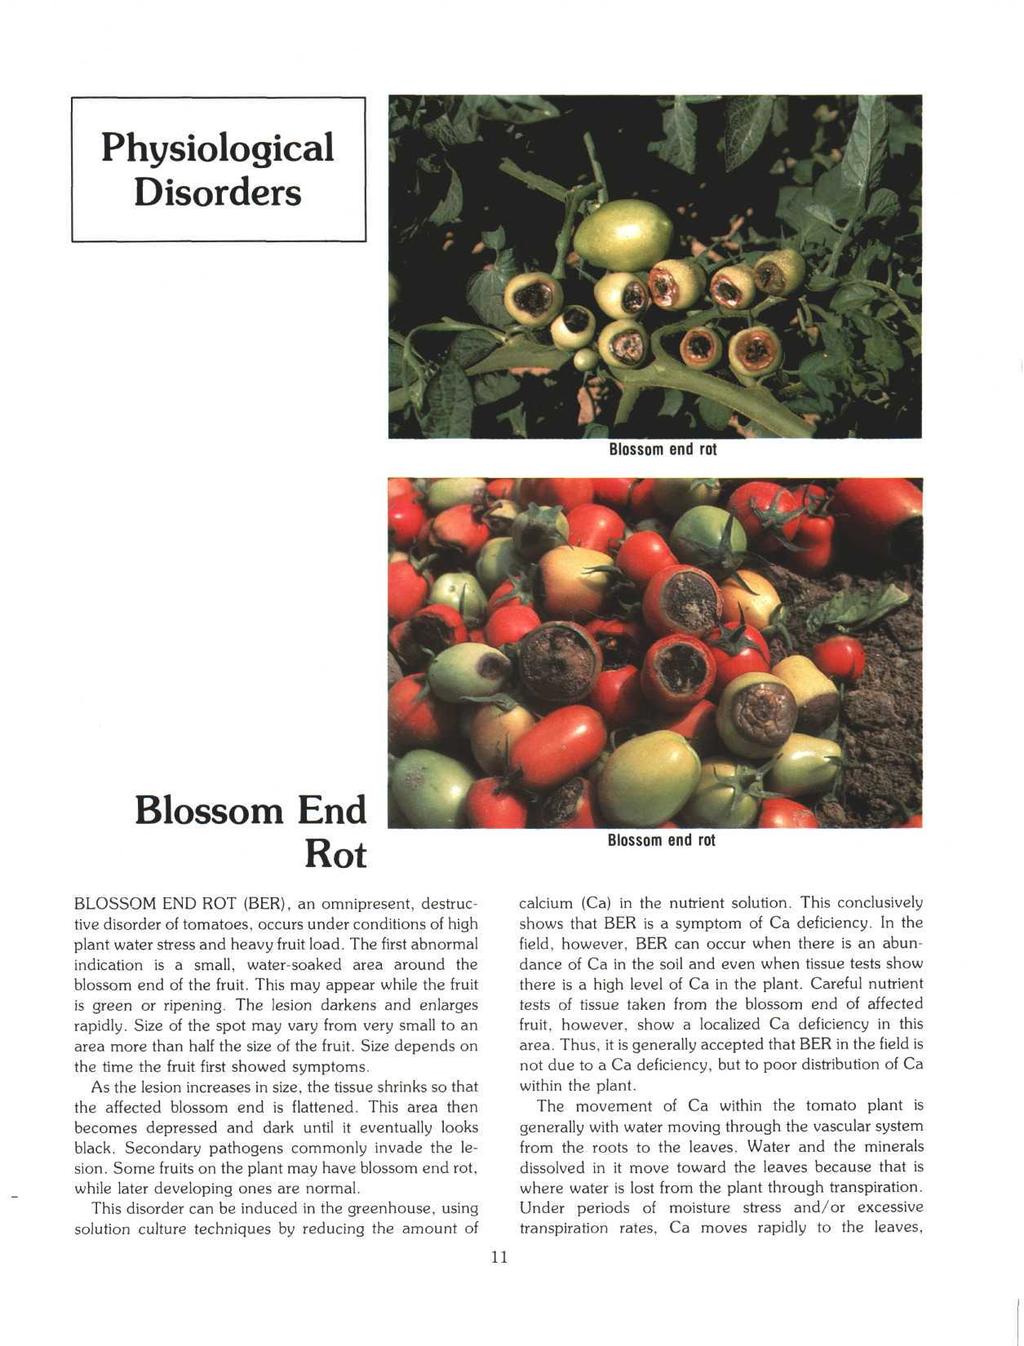 Physiological Disorders Blossom end rot Blossom End Rot Blossom end rot BLOSSOM END ROT (BER), an omnipresent, destructive disorder of tomatoes, occurs under conditions of high plant water stress and